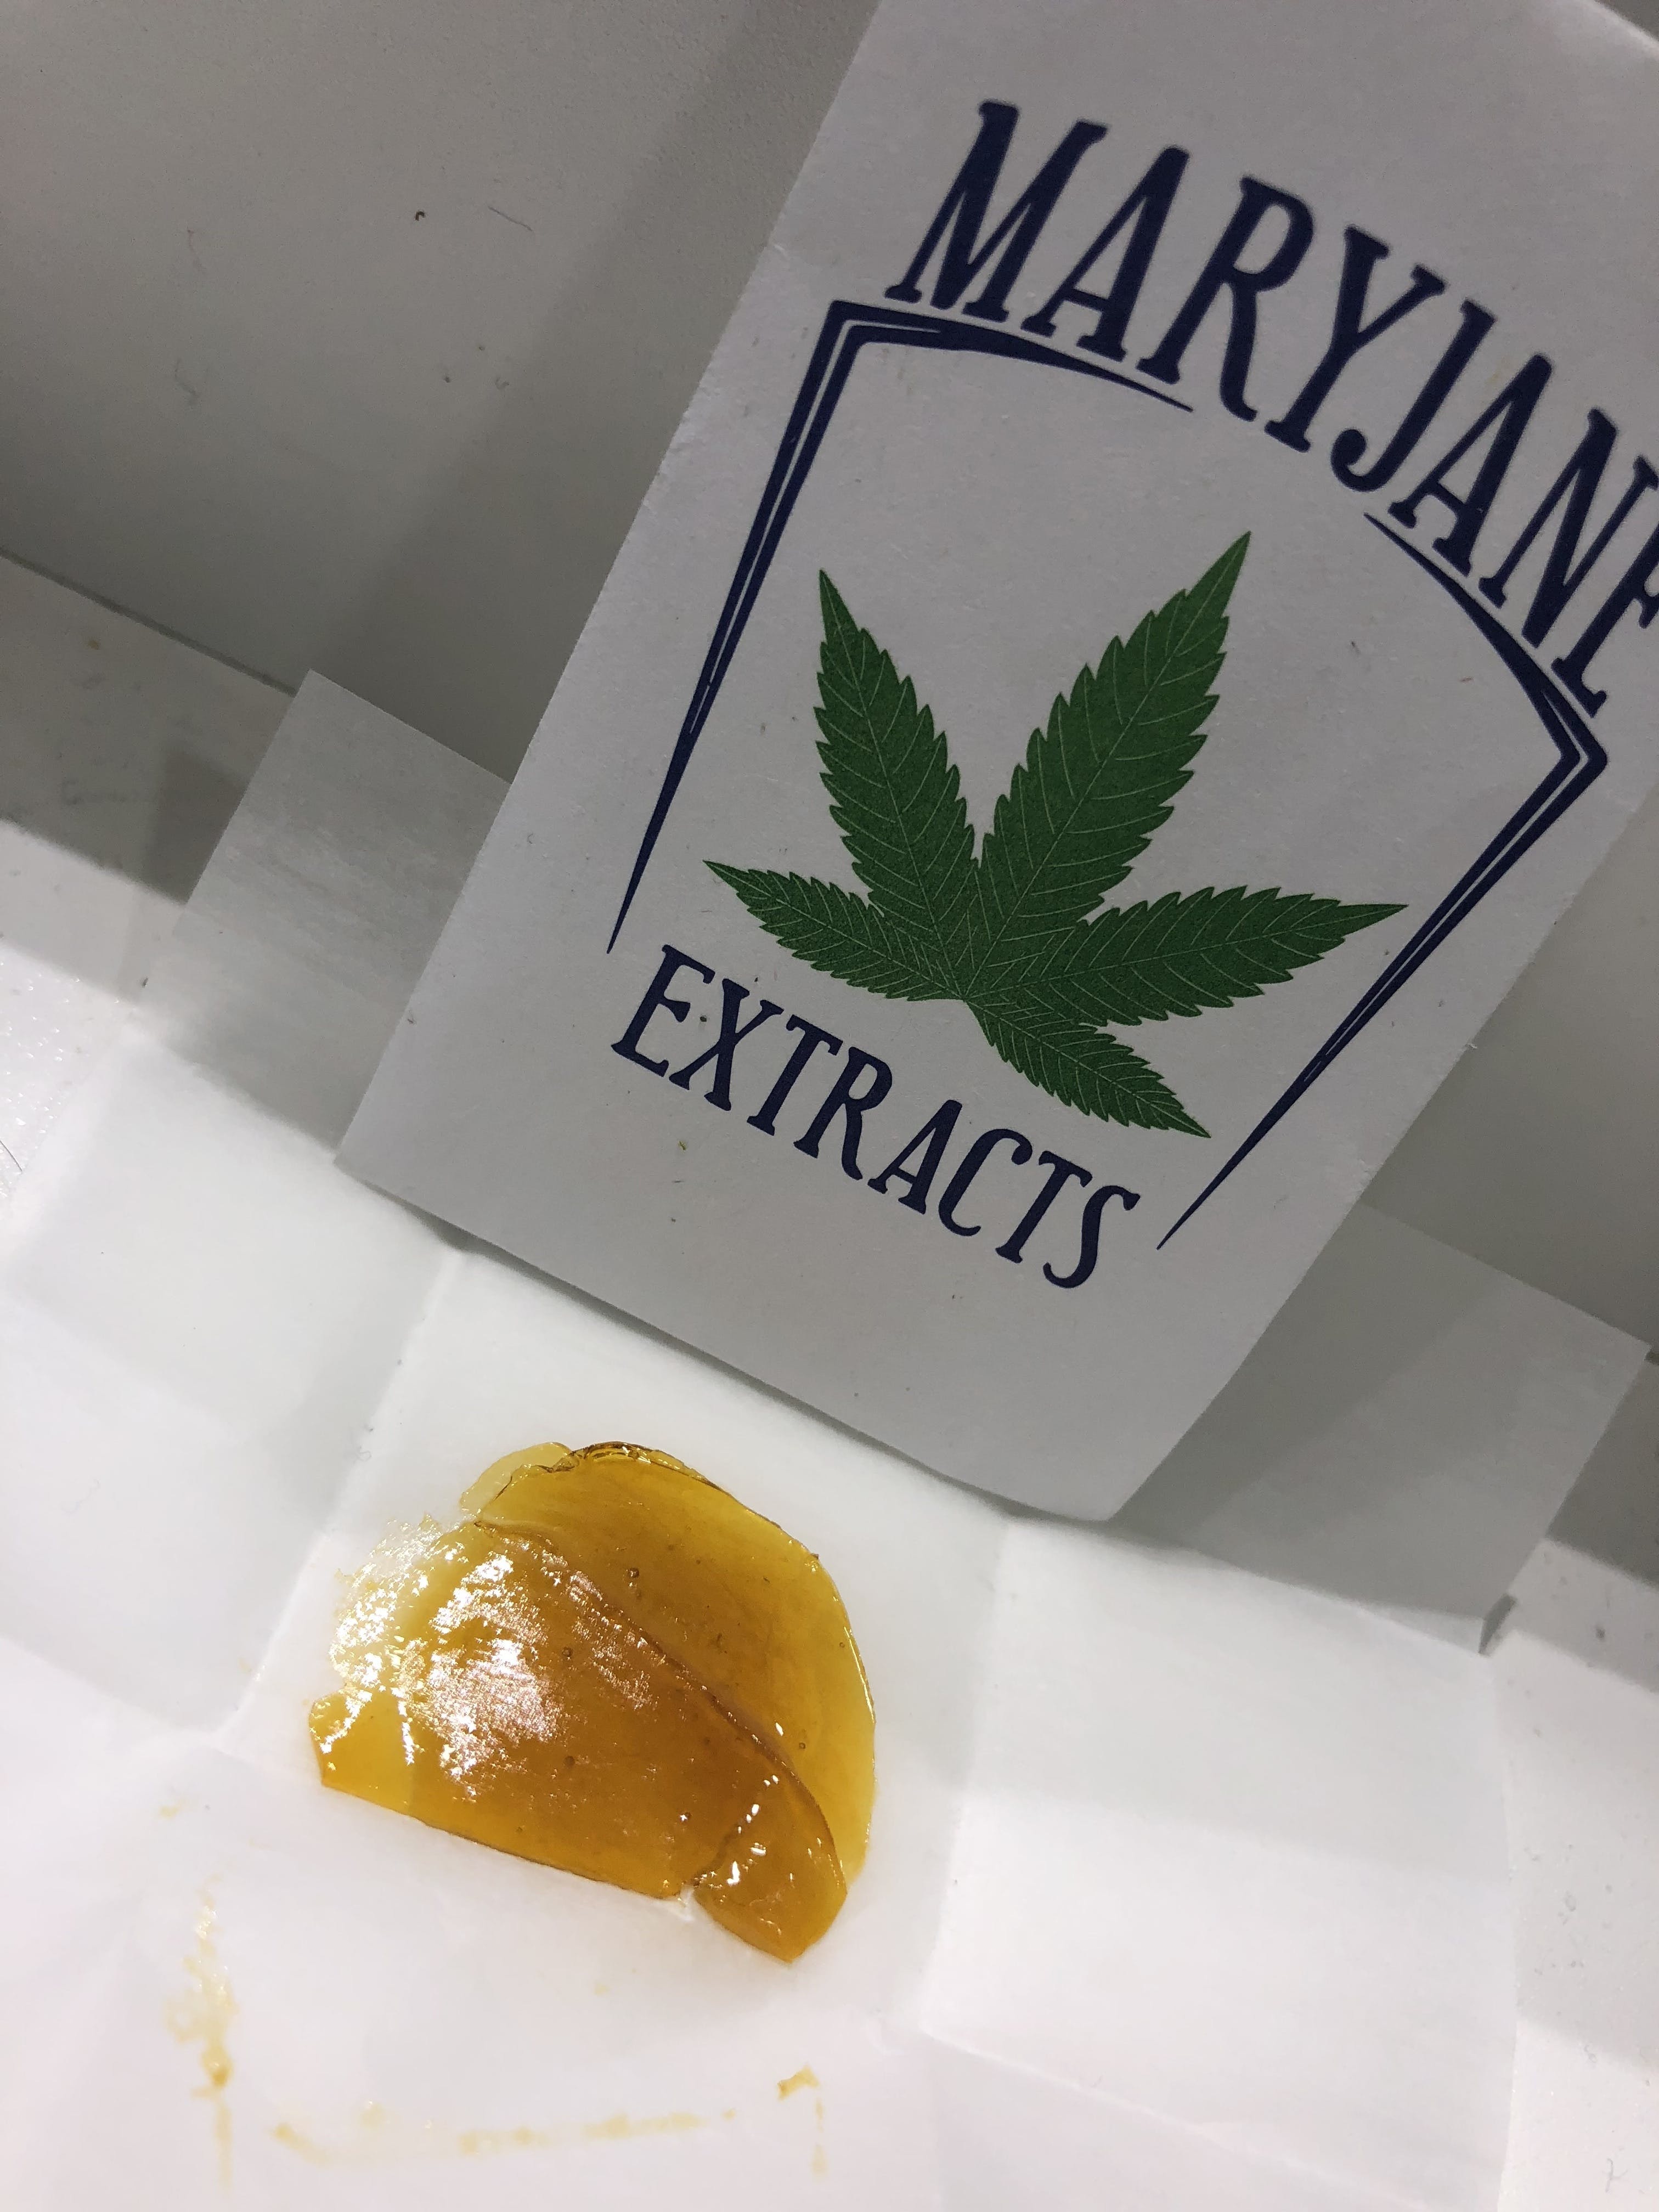 Mary Jane Extracts